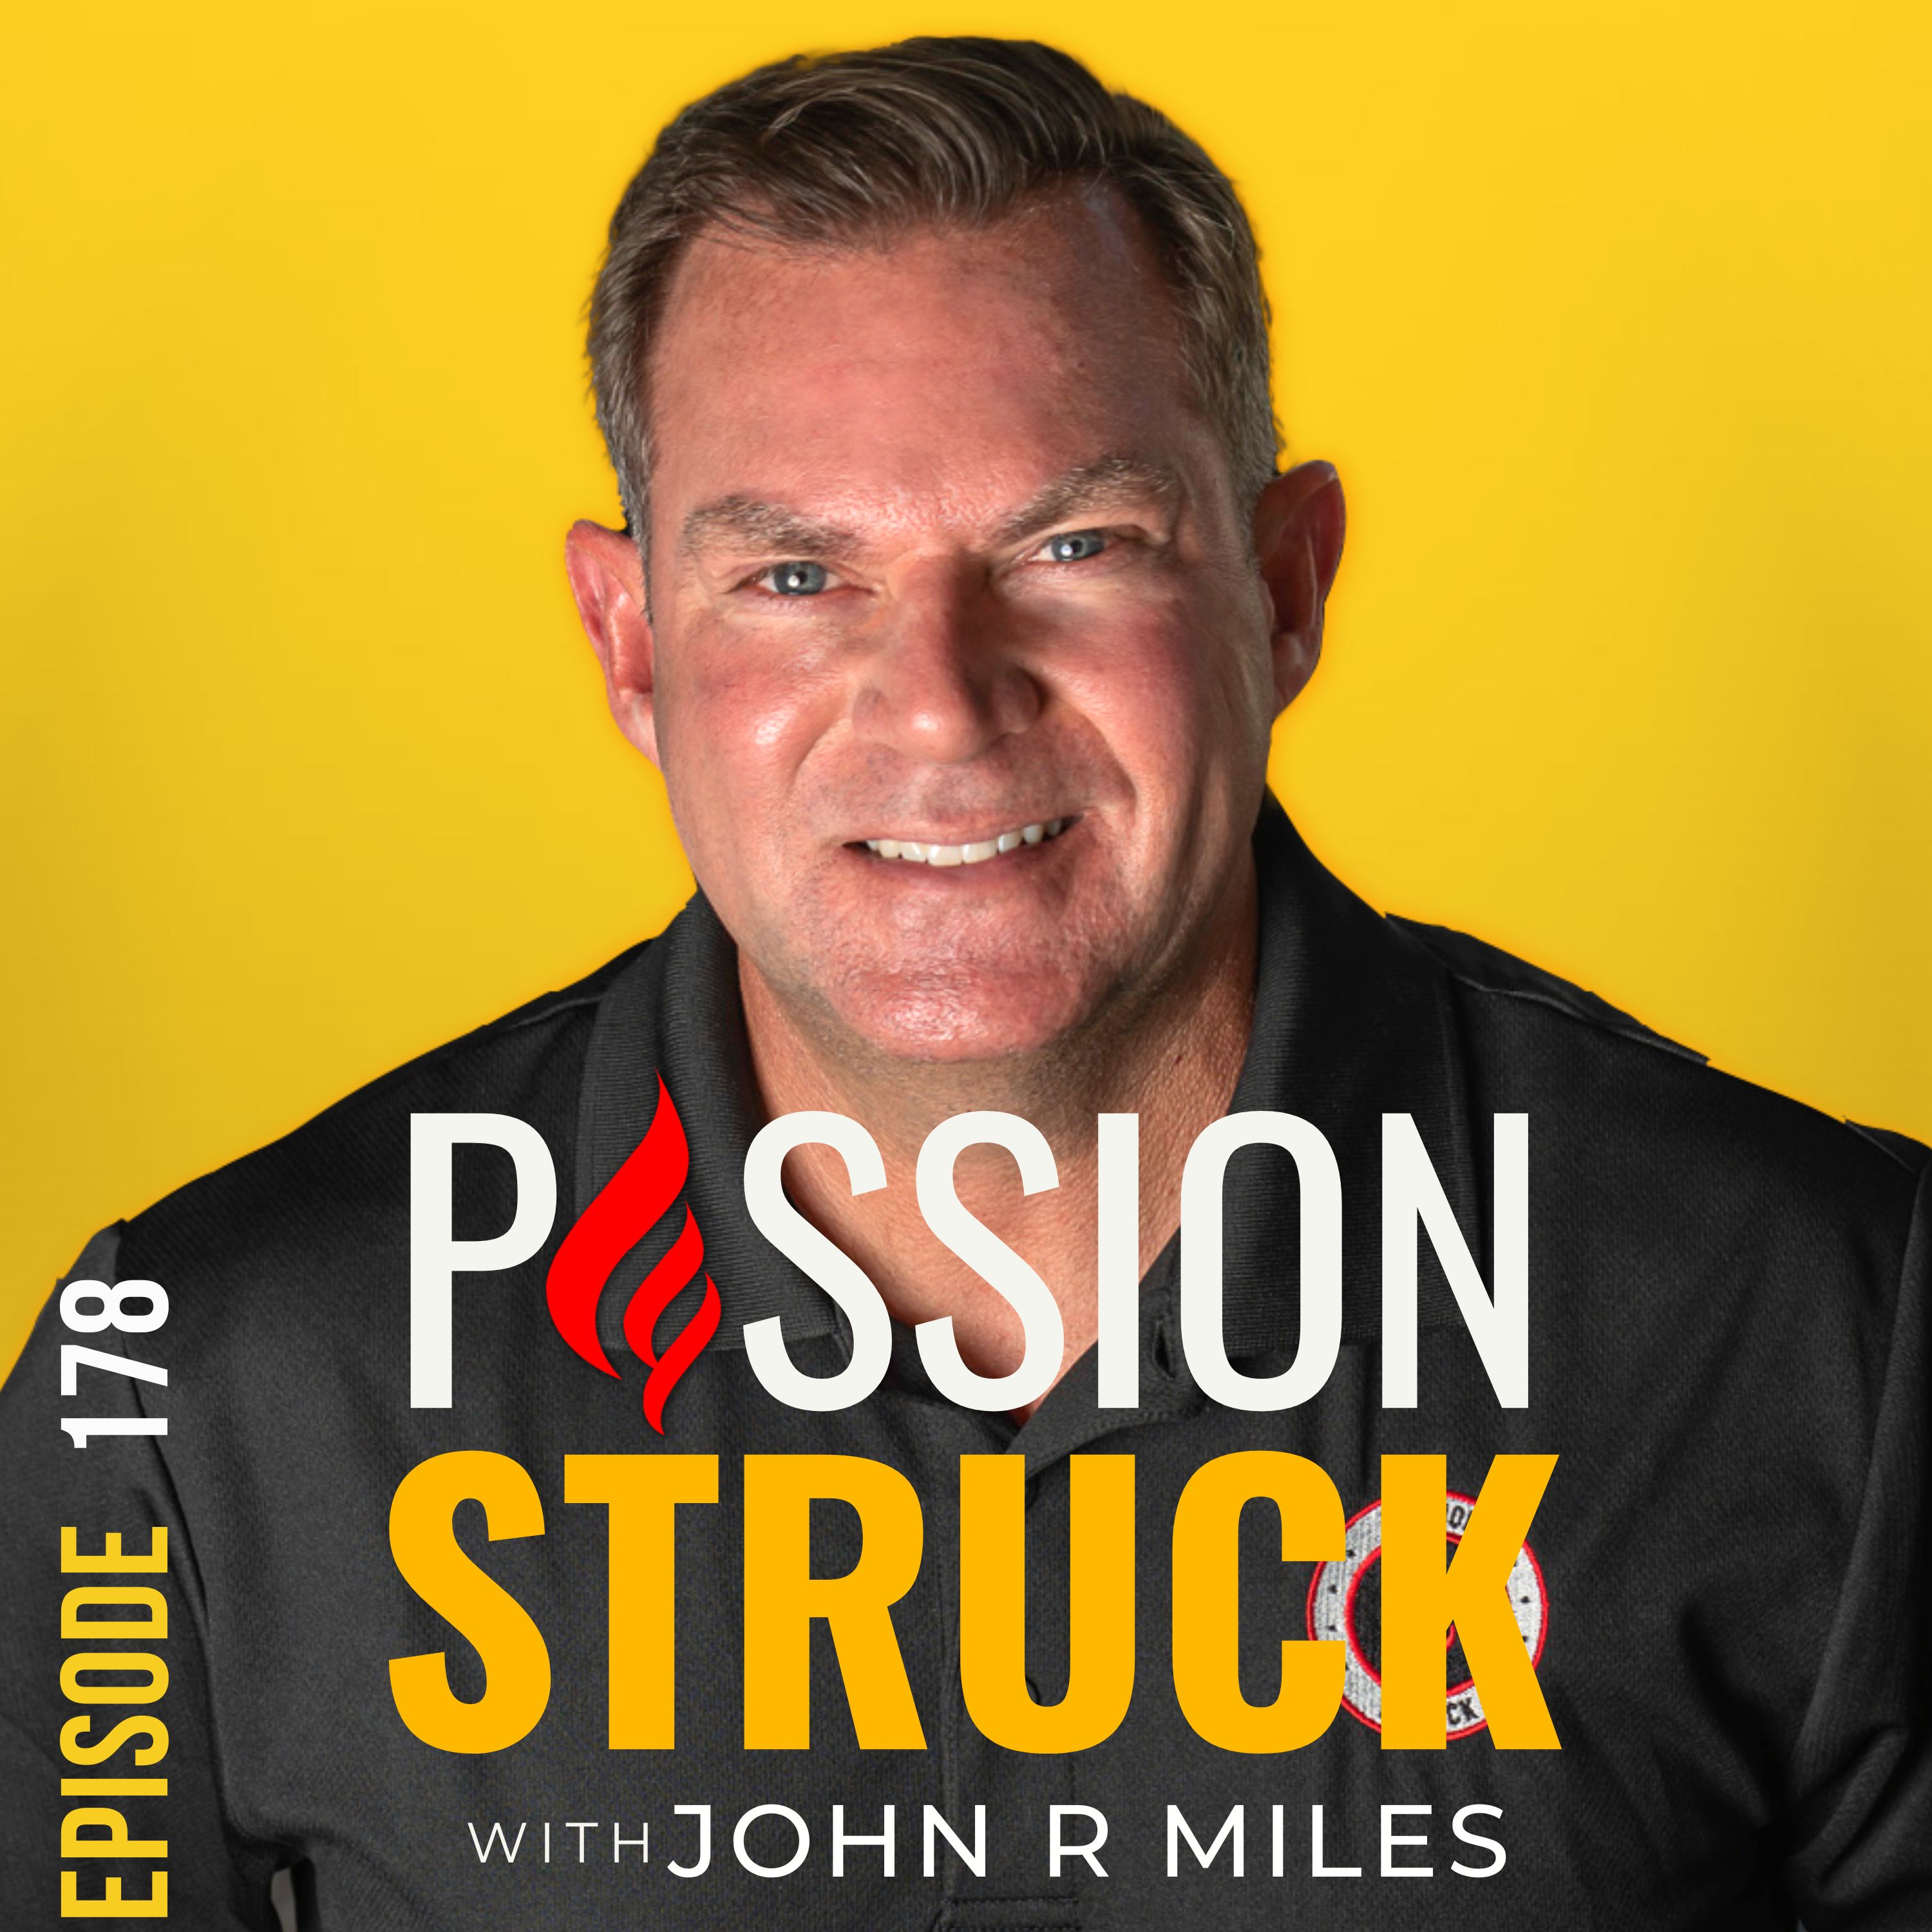 Passion Struck with John R. Miles Album Cover Episode 178 Album Cover on stop making excuses